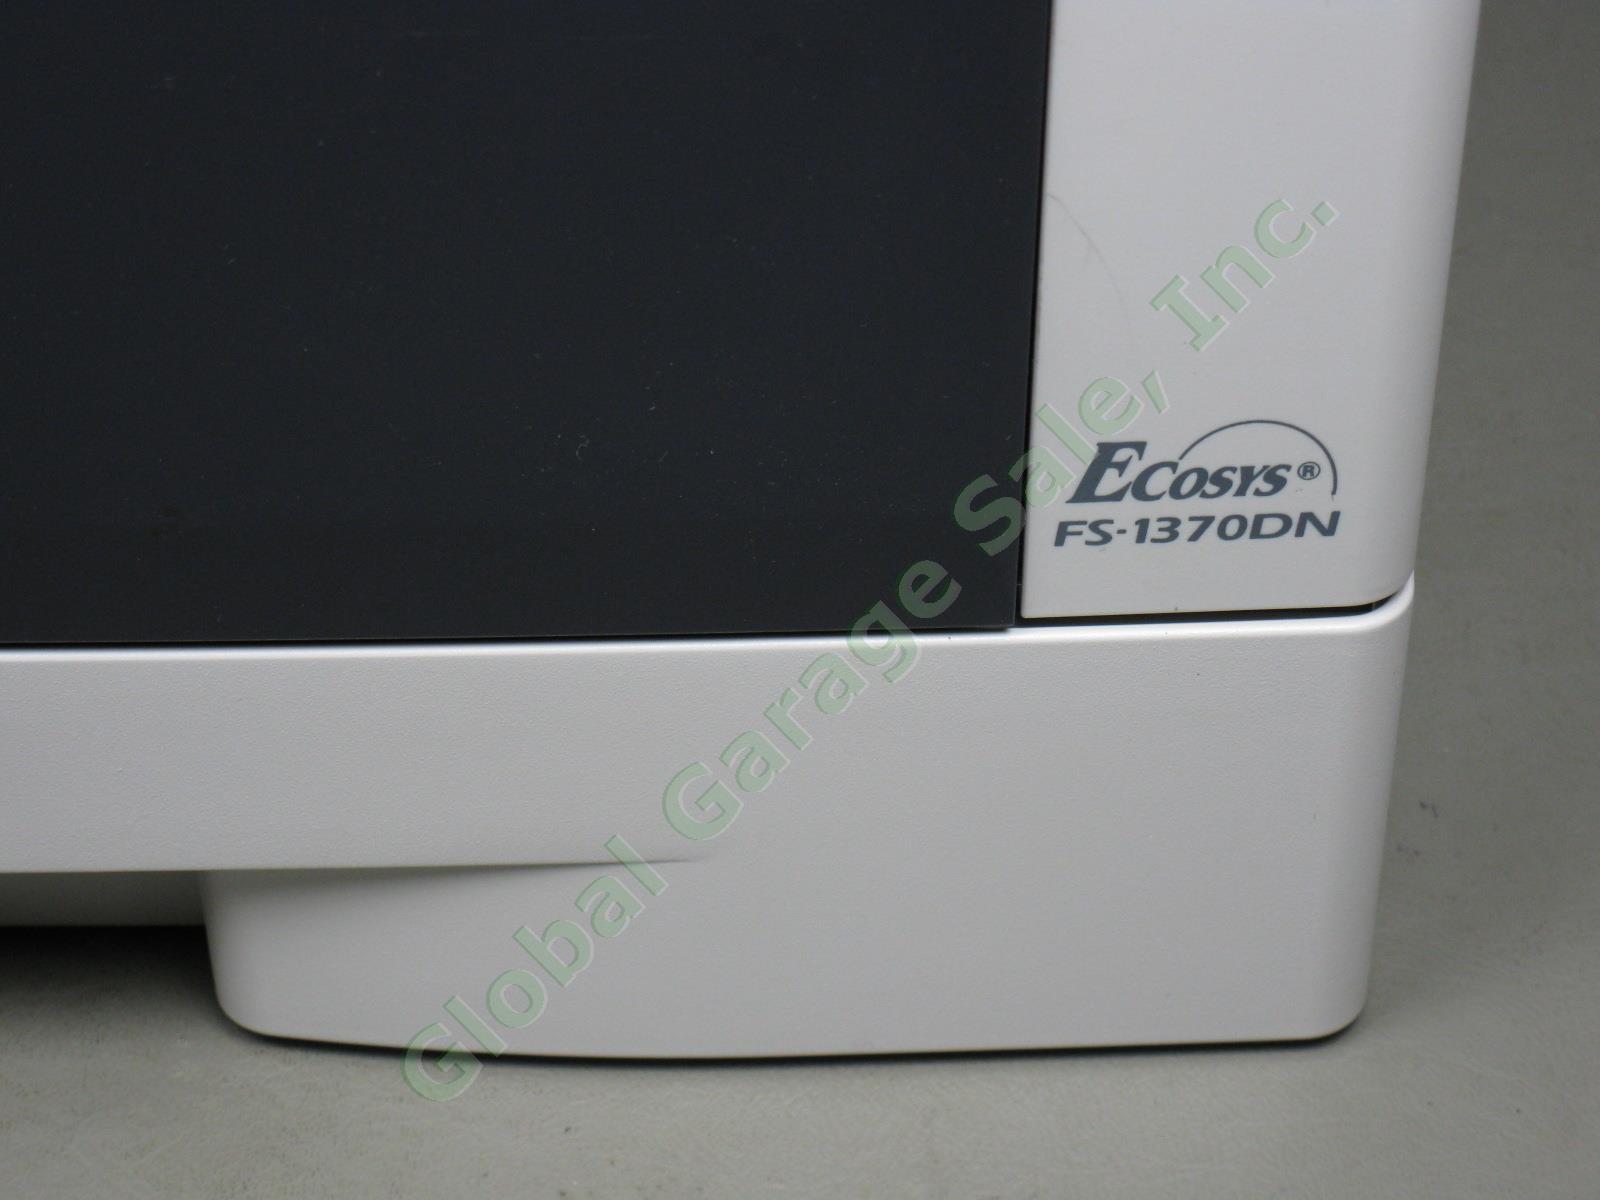 Kyocera Ecosys FS1370DN Workgroup Network Laser Printer Exc Cond! 19,510 Pages 1